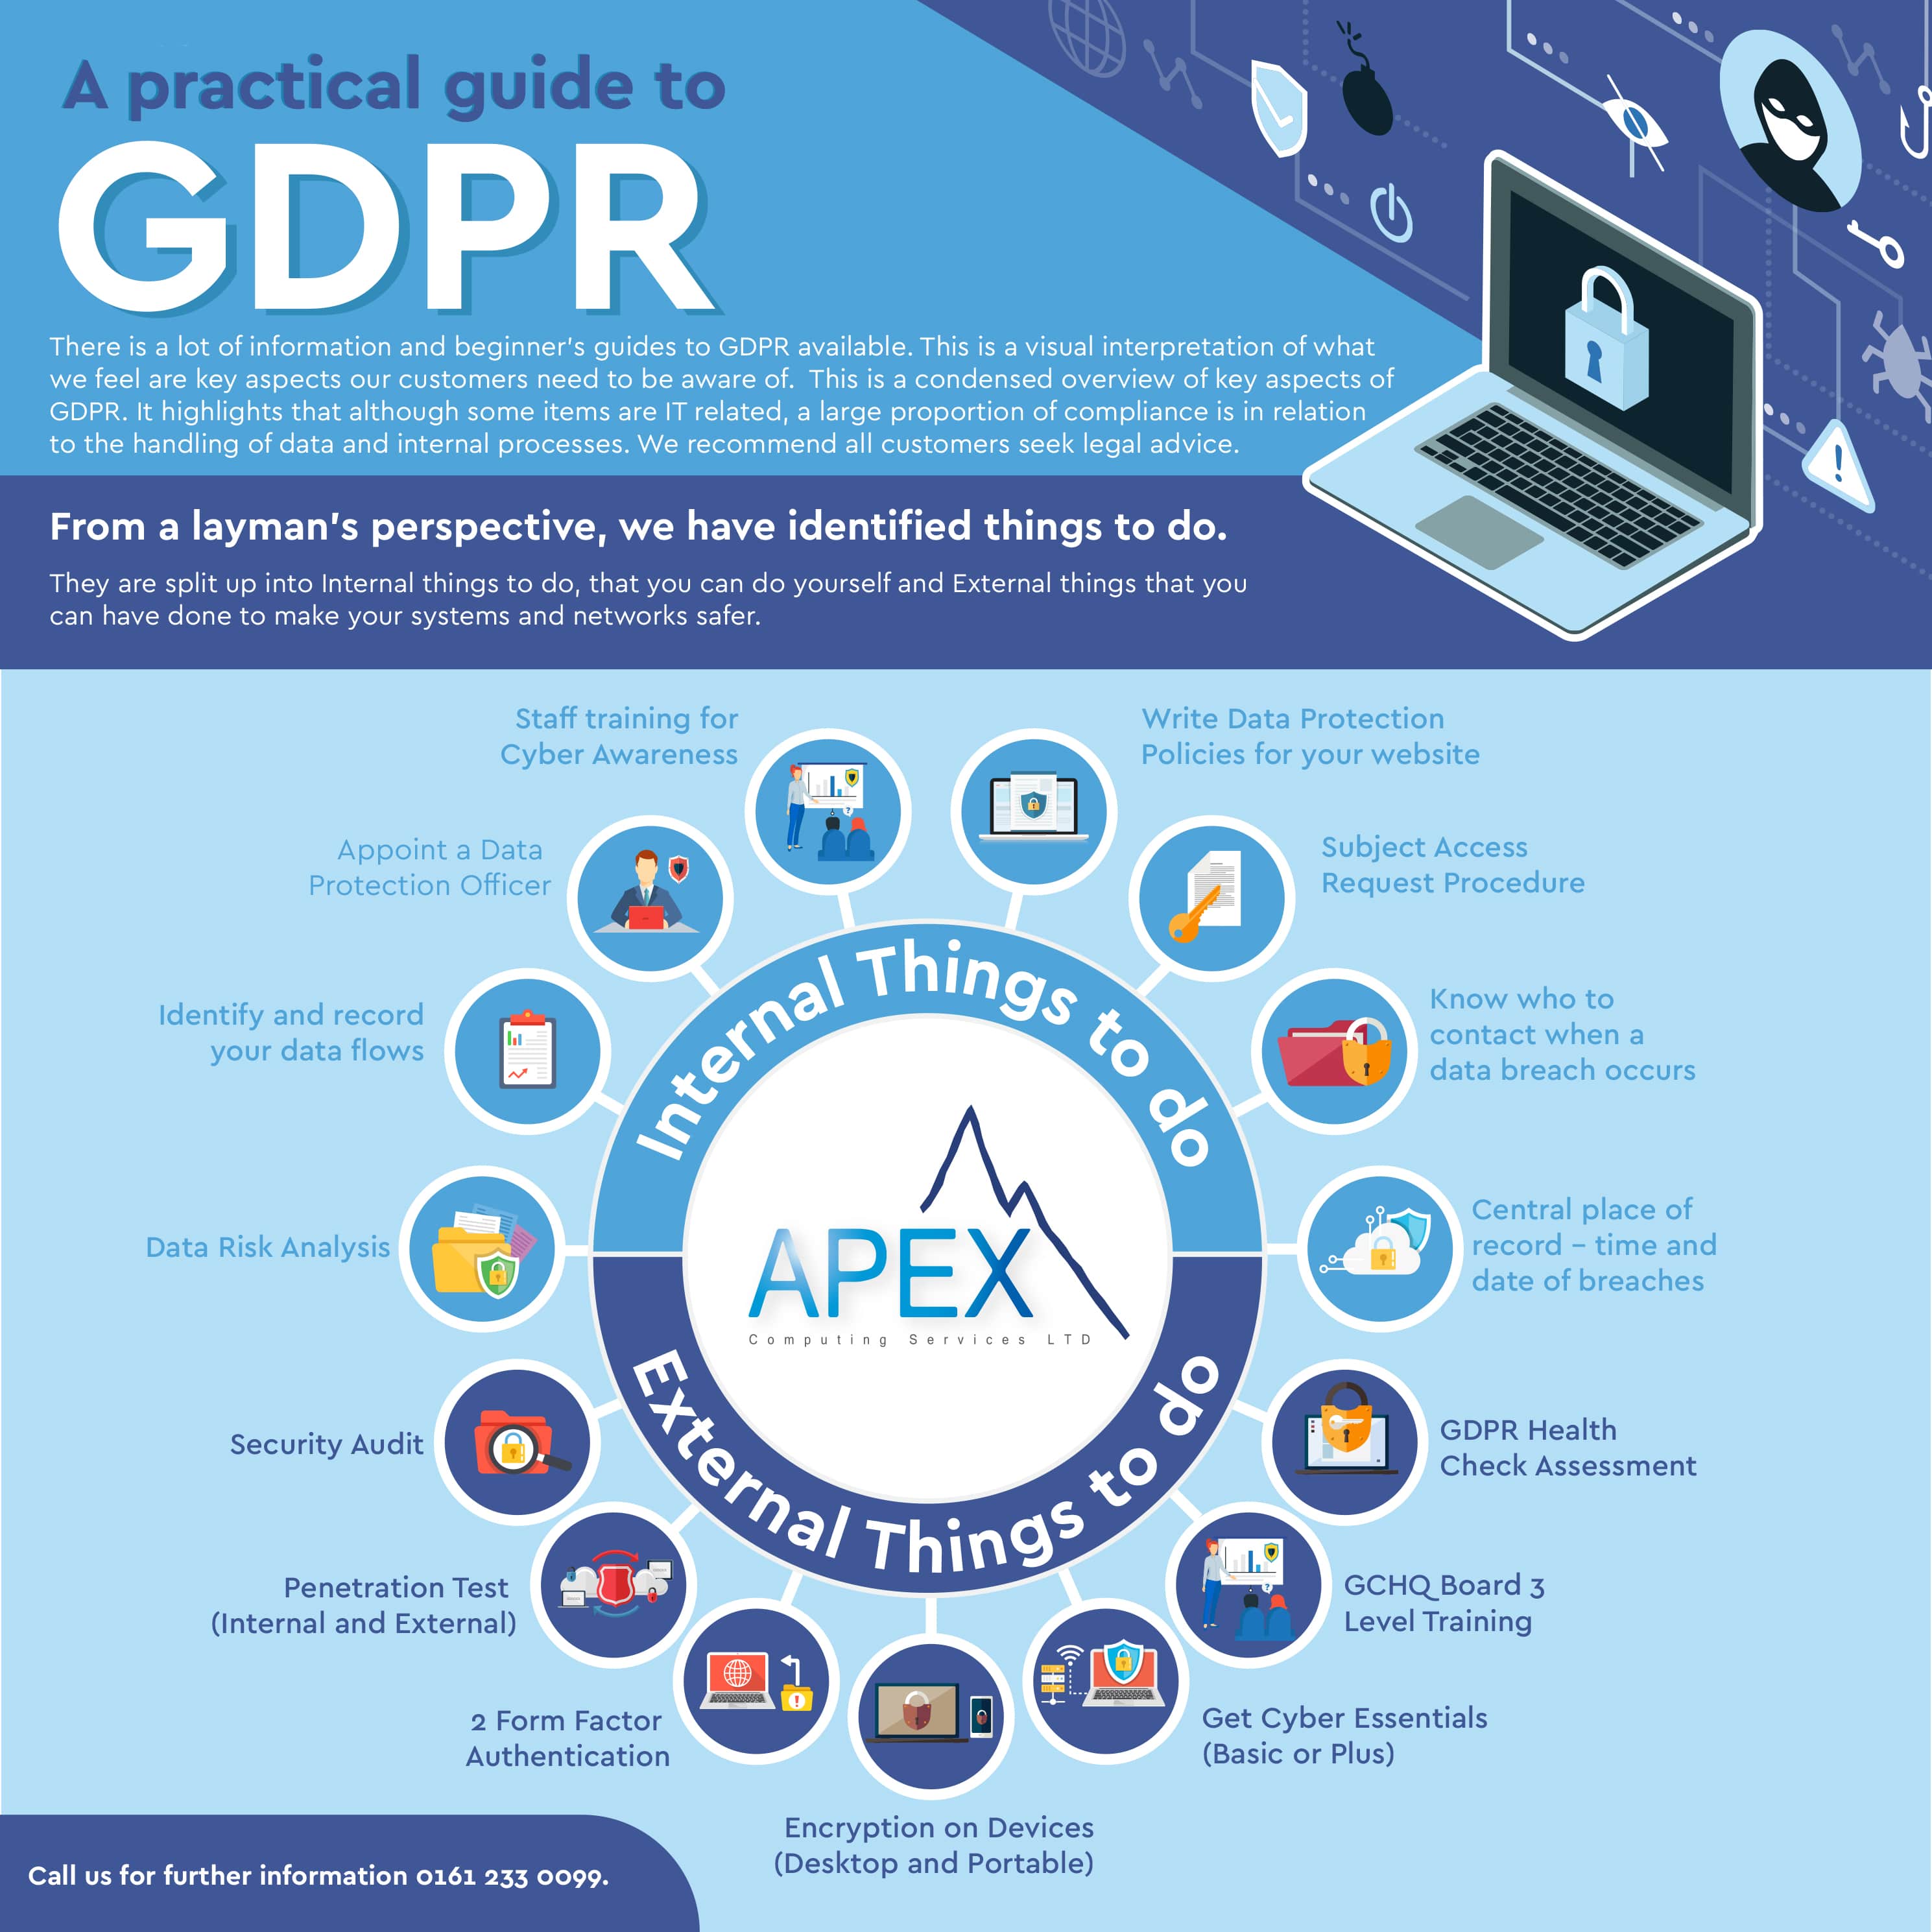 A Practical Guide To GDPR